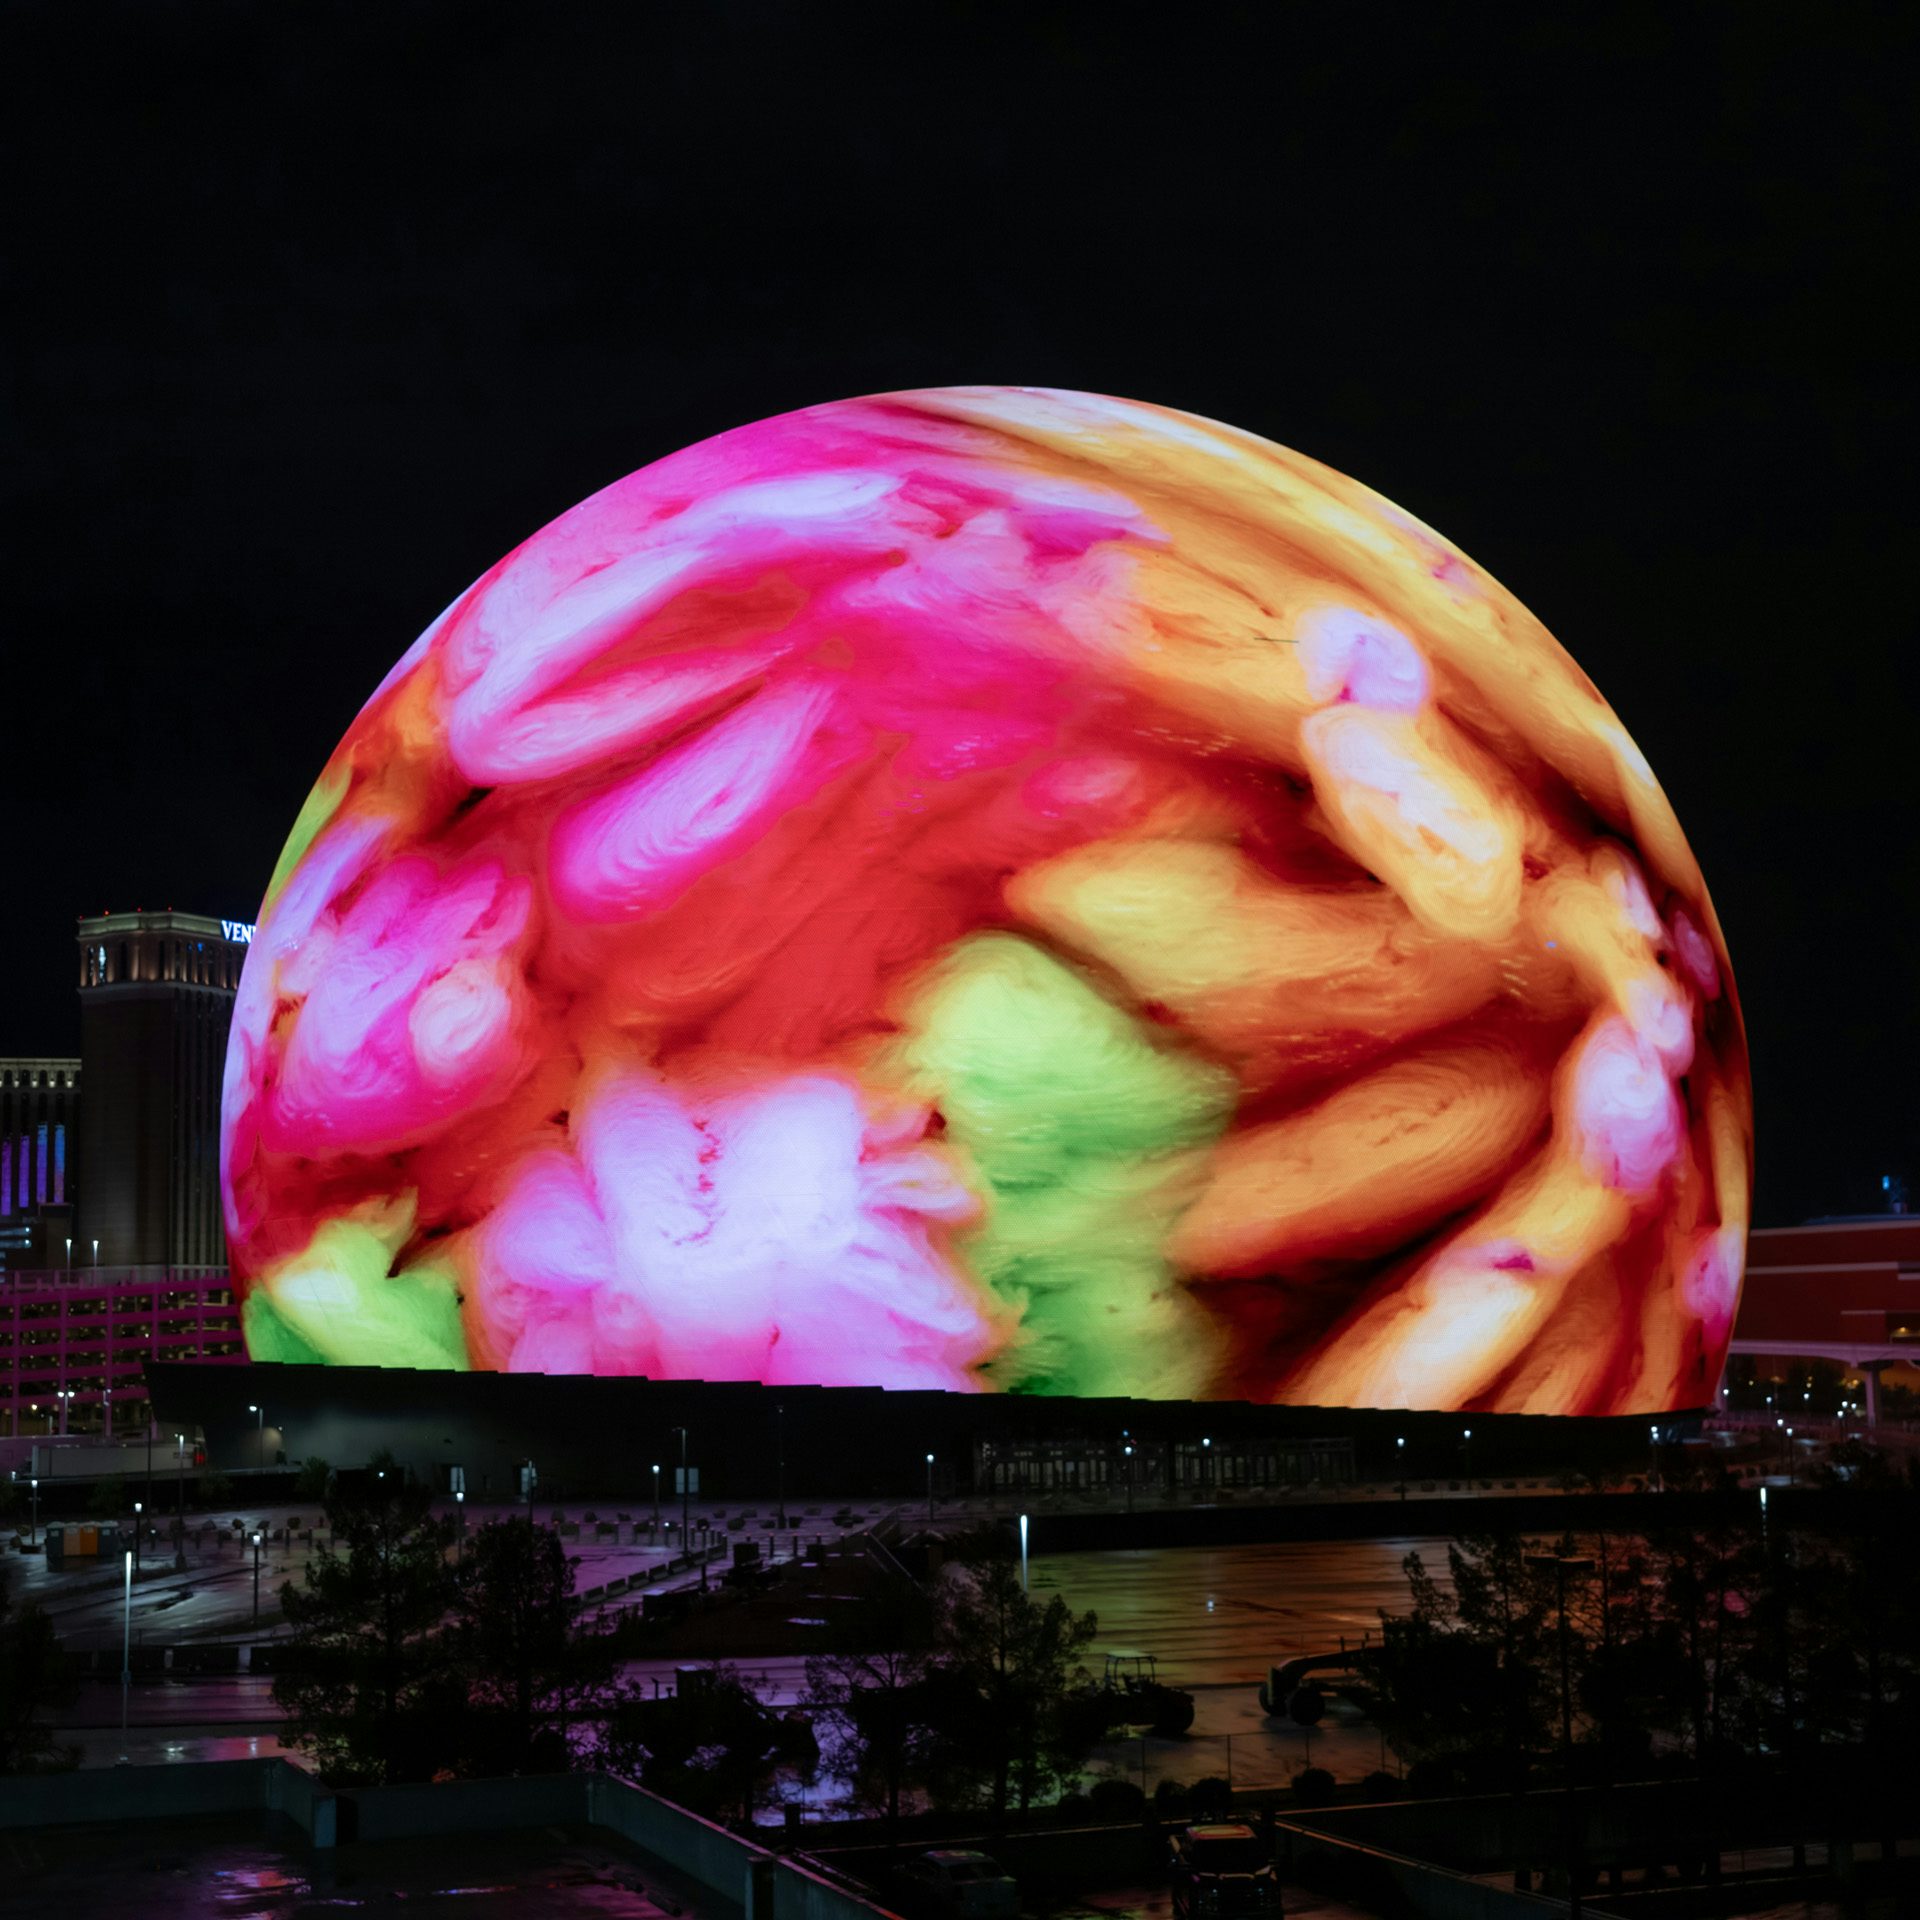 Image of the exterior of the Sphere in Las Vegas showing a colourful AI visualisation by Refik Anadol